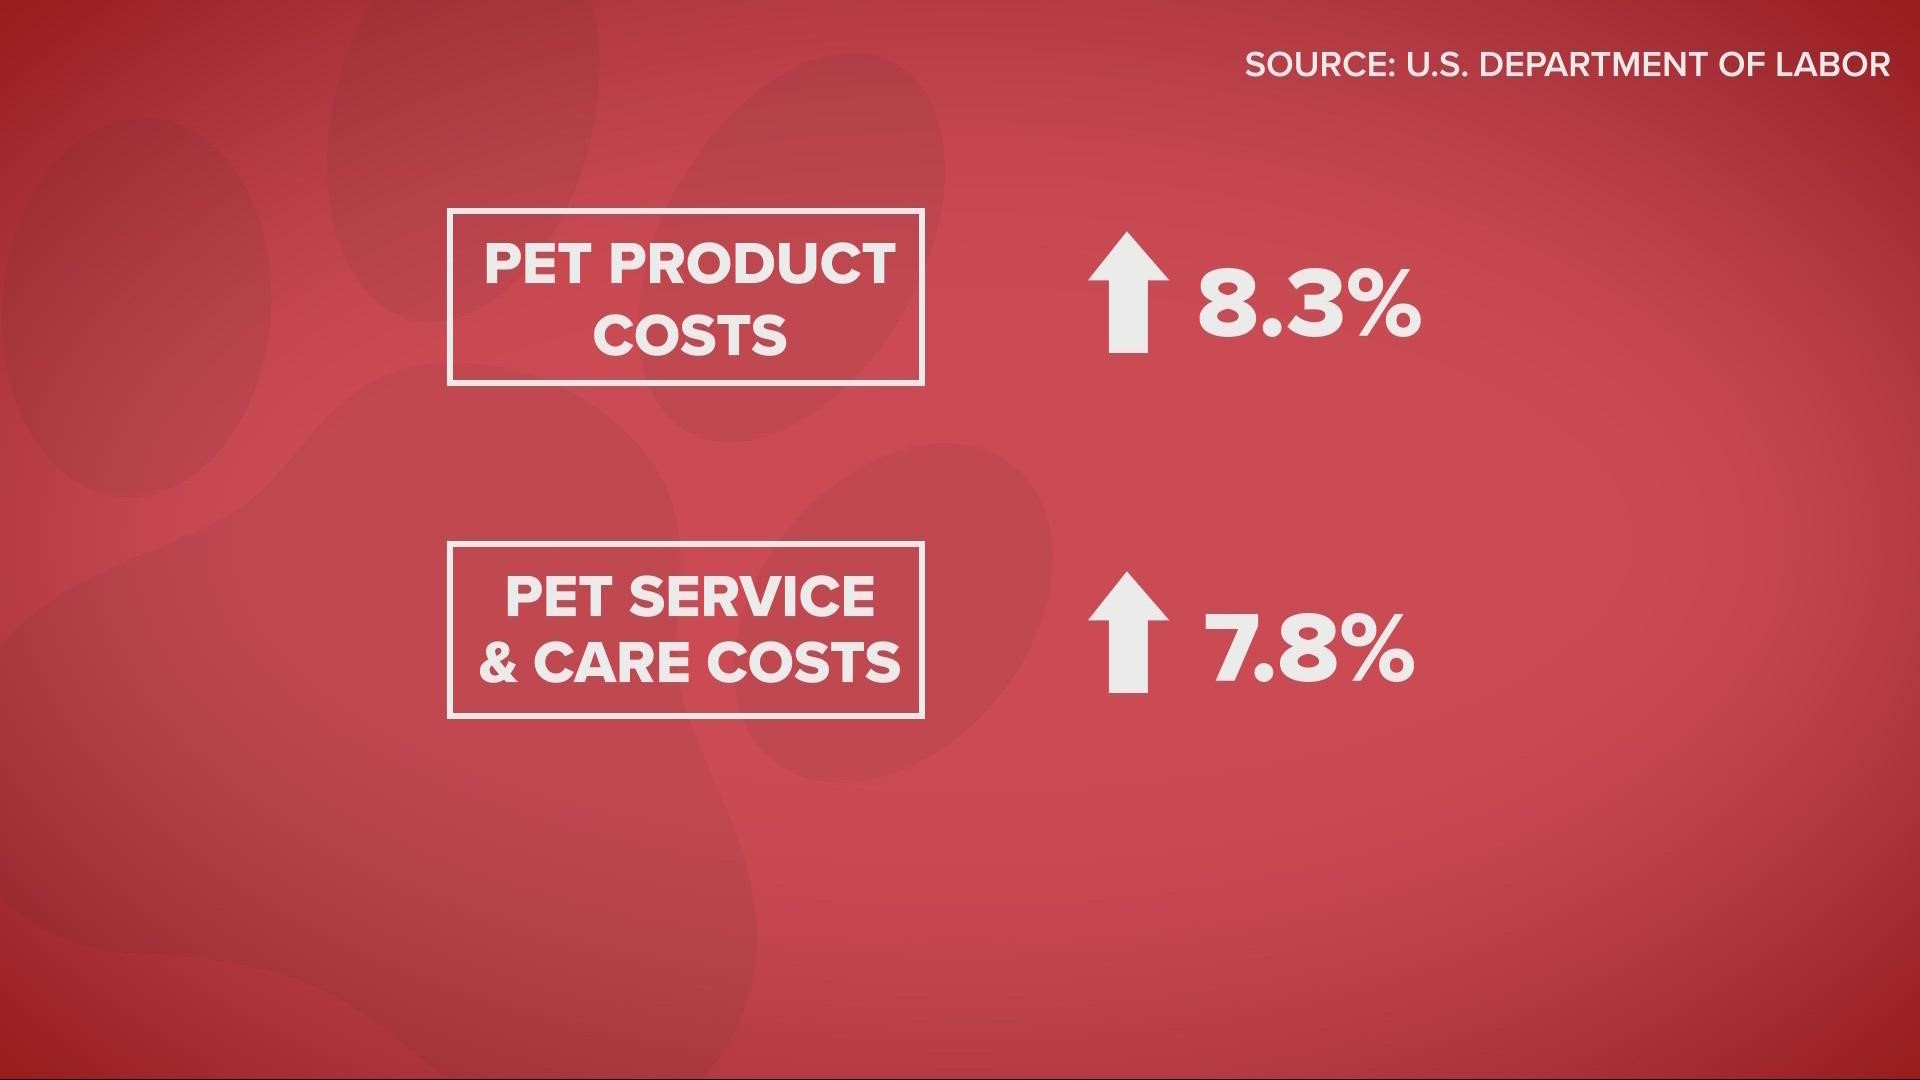 Pet food prices are rising with inflation as food pantries see a bigger need throughout the country.